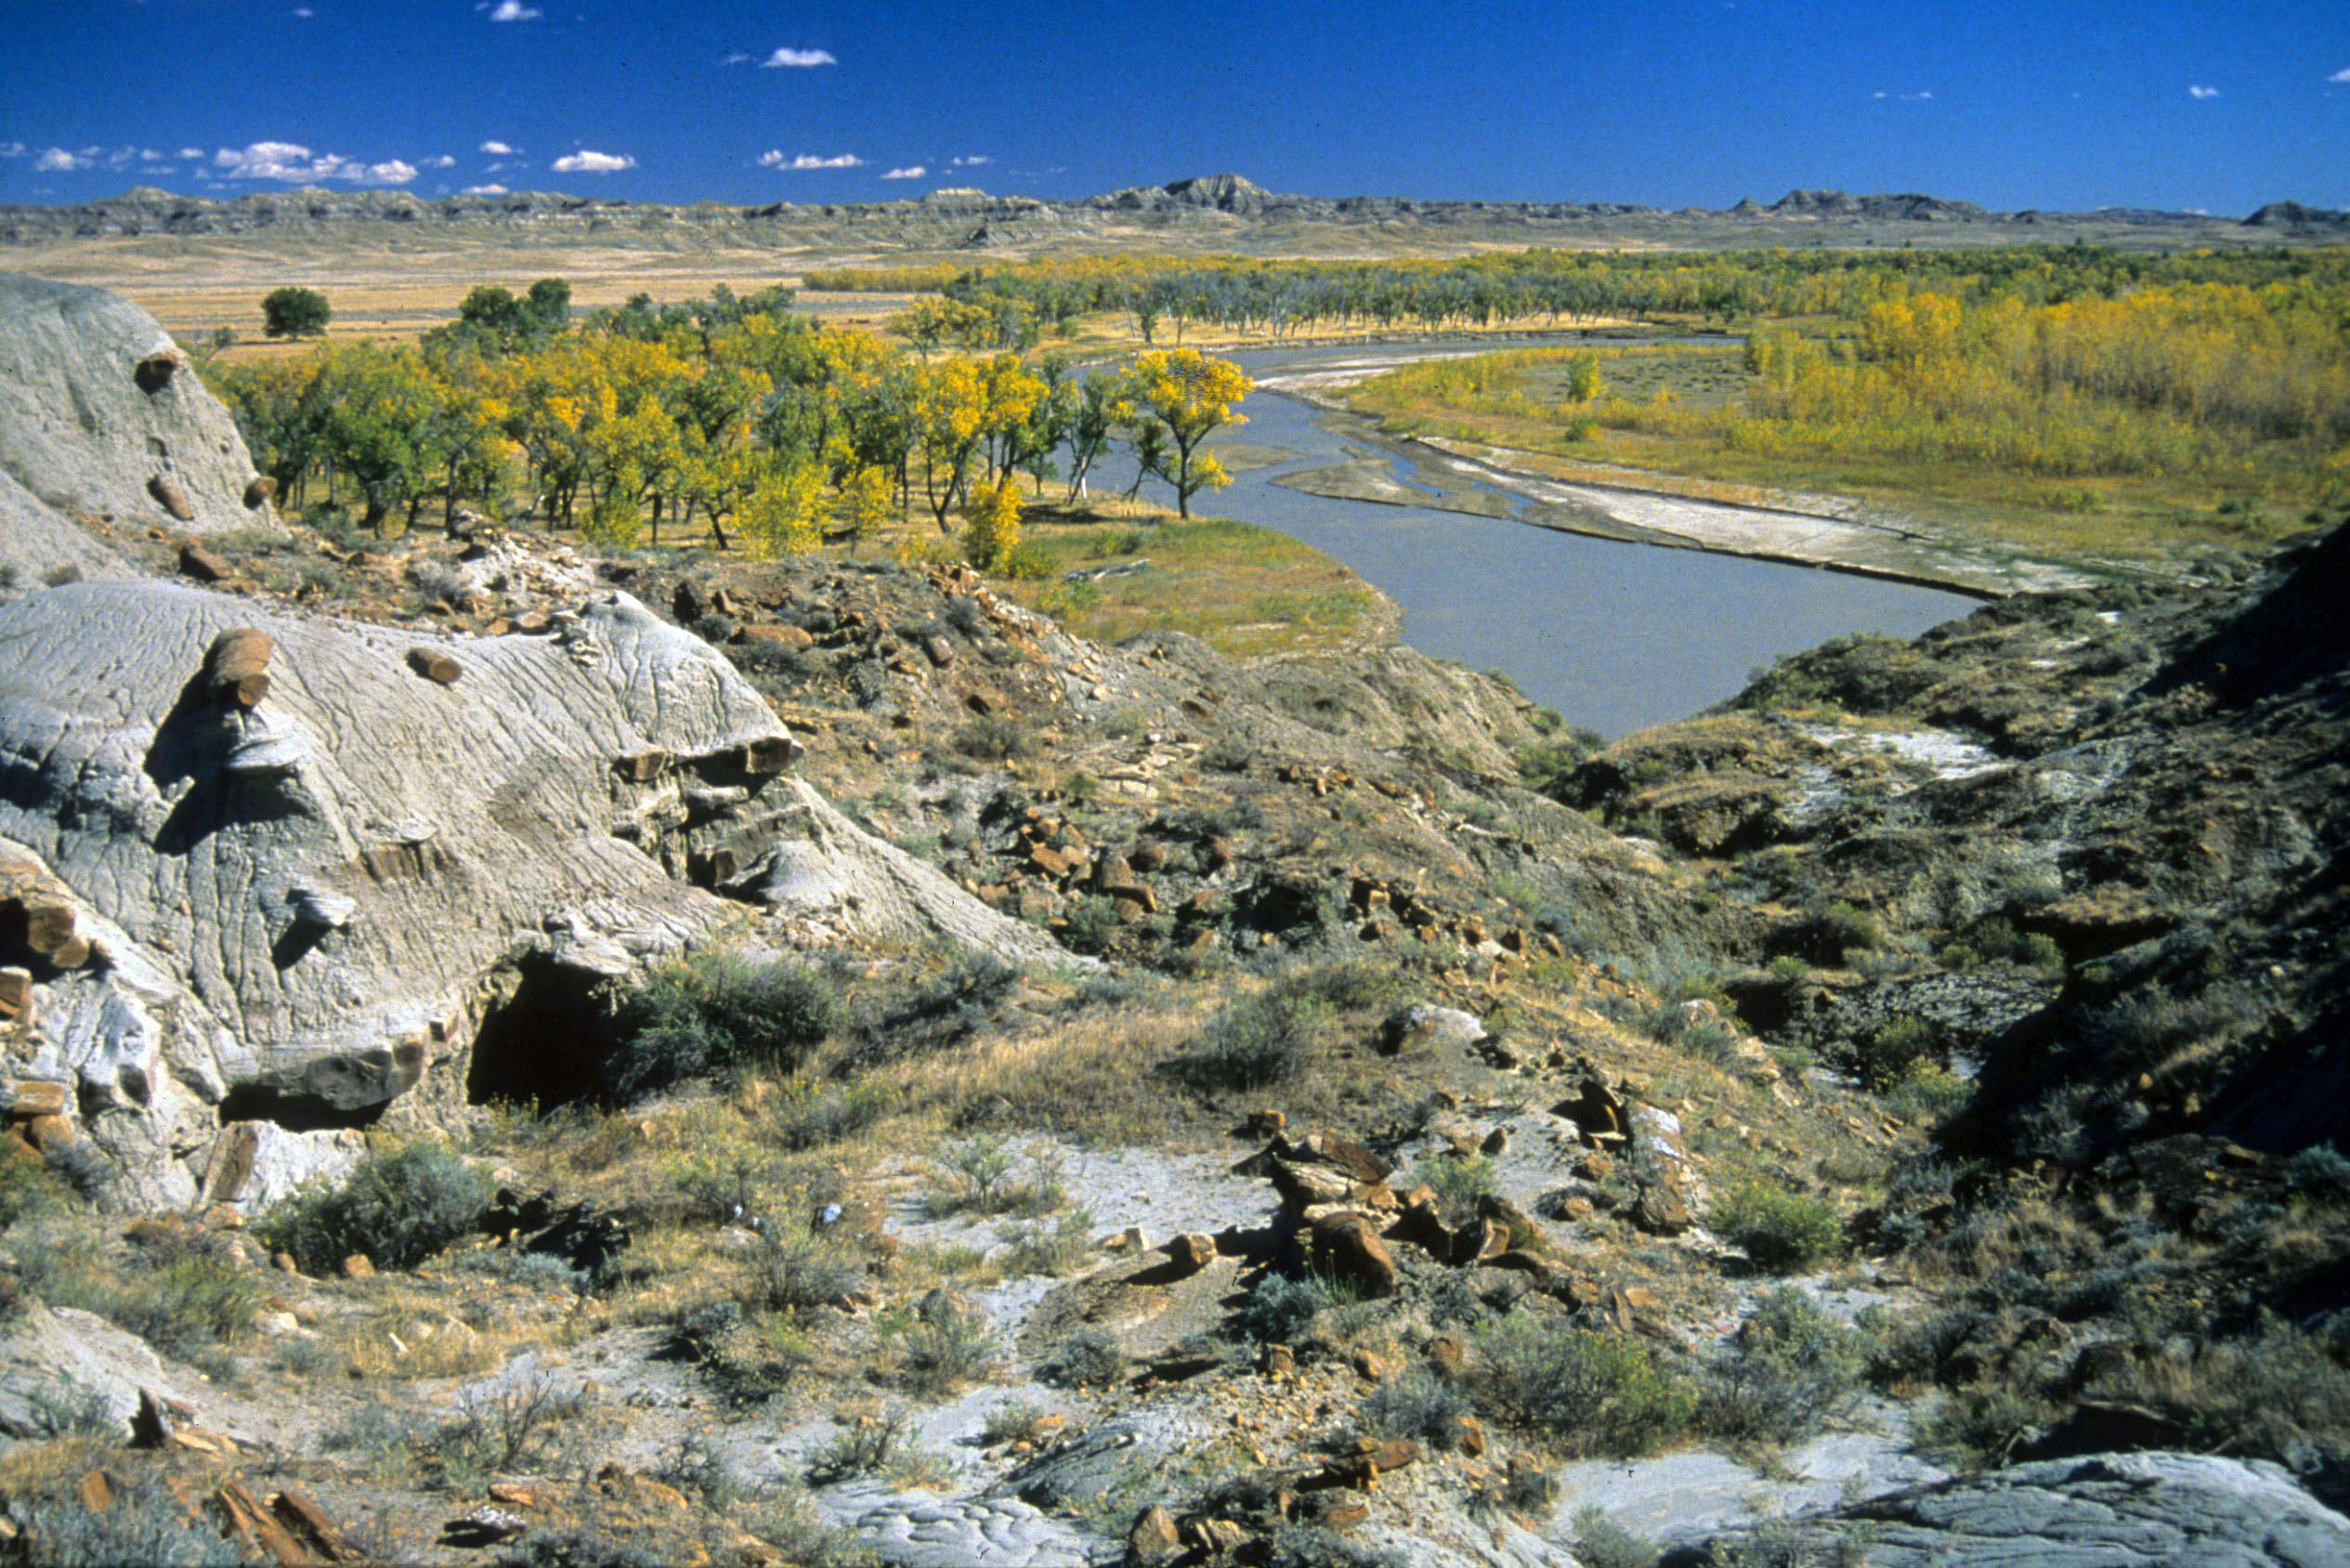 The Powder River meanders through remote prairie lands southeast of Miles City